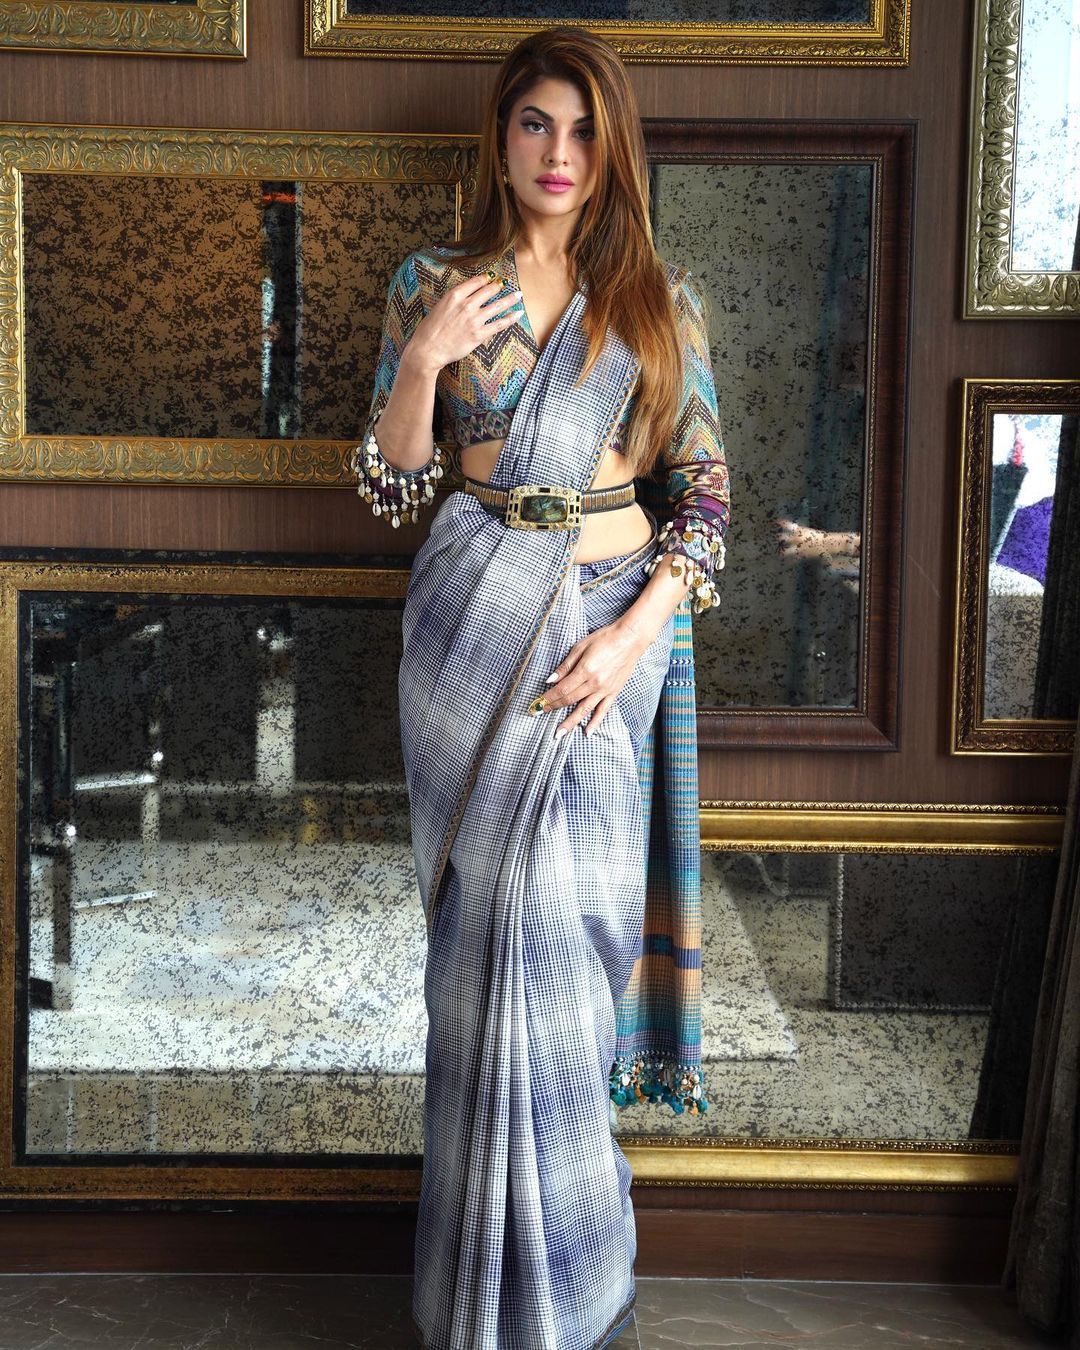 Jacqueline Fernandez looks graceful in the printed saree.